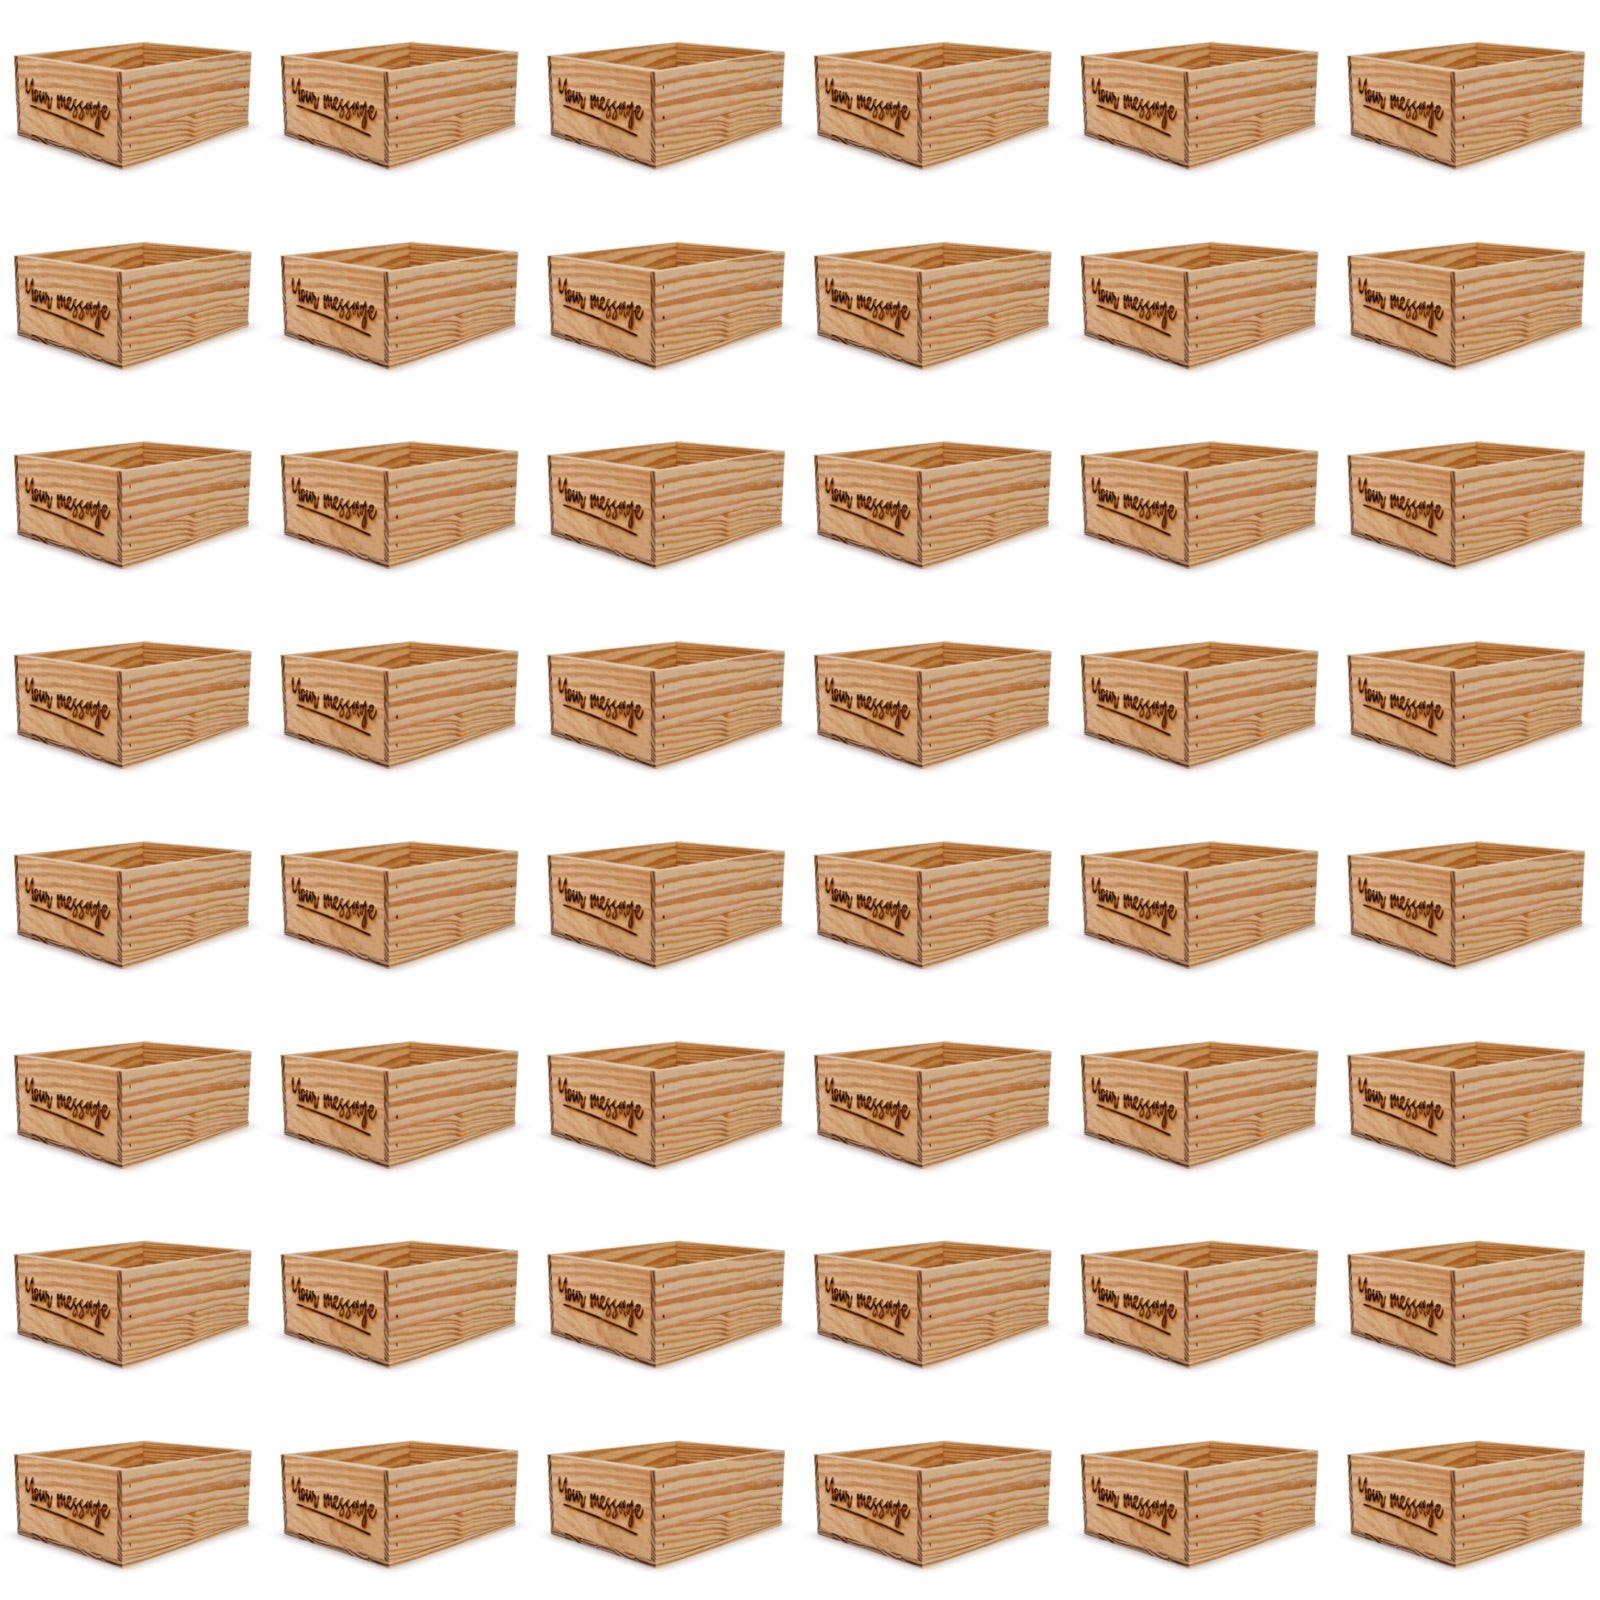 48 Small wooden crates with custom message 12x9.75x5.25